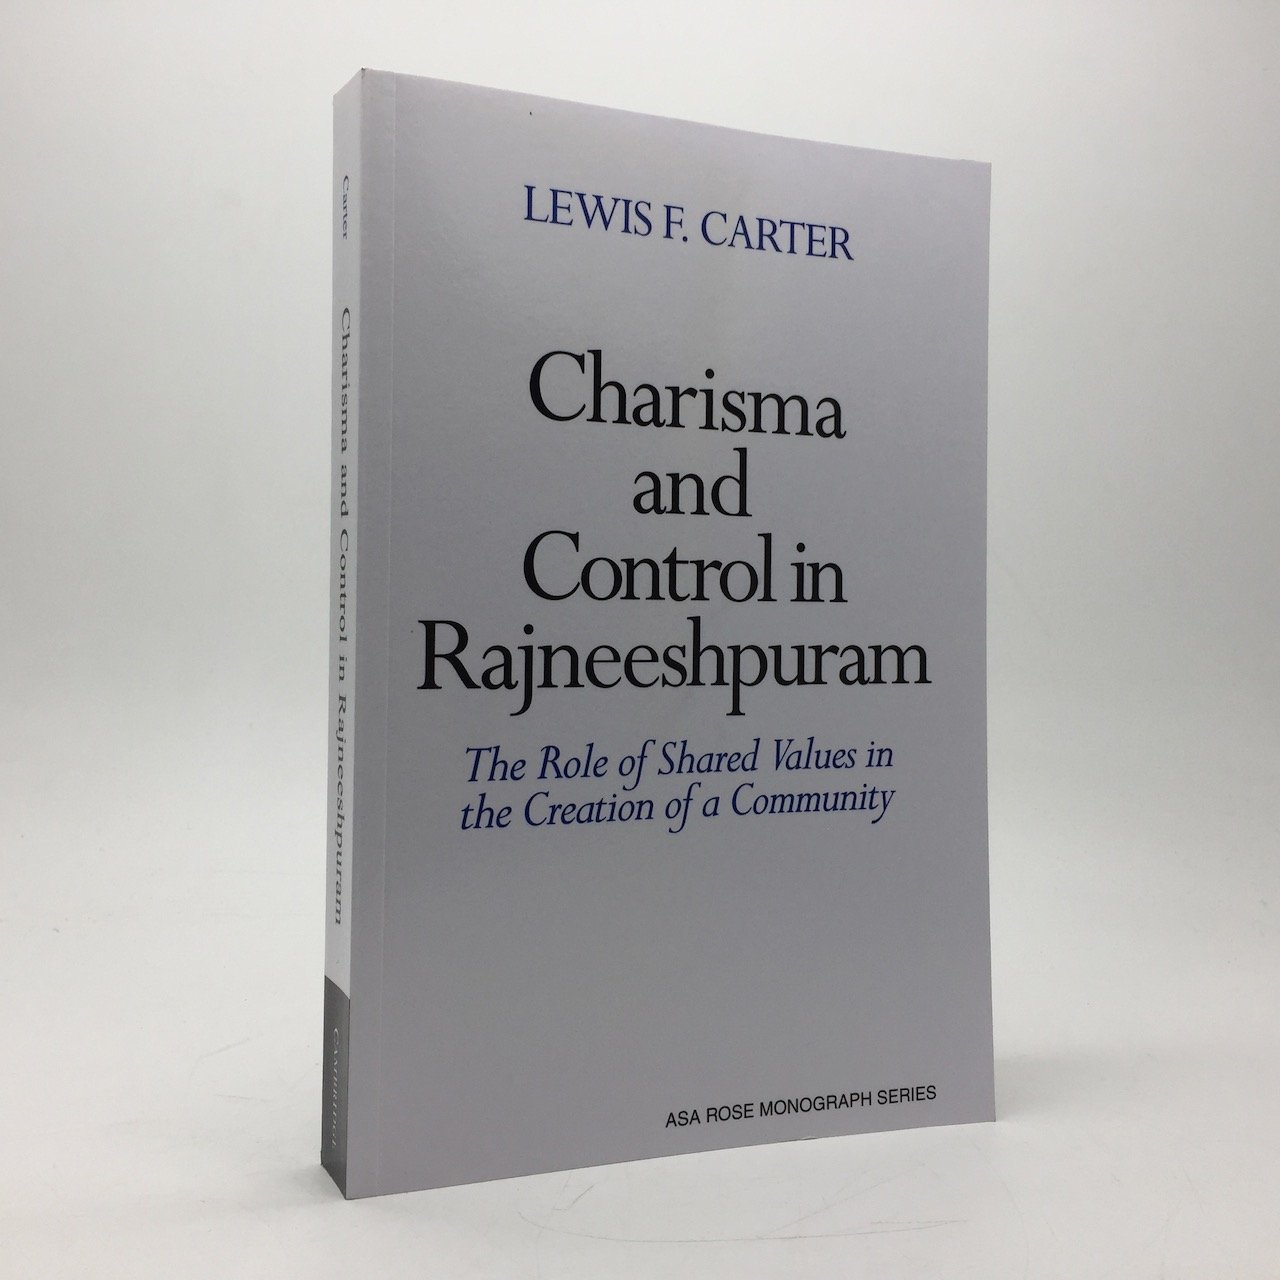 CHARISMA AND CONTROL IN RAJNEESHPURAM: THE ROLE OF SHARED VALUES IN THE CREATION OF A COMMUNITY - CARTER, Lewis F.